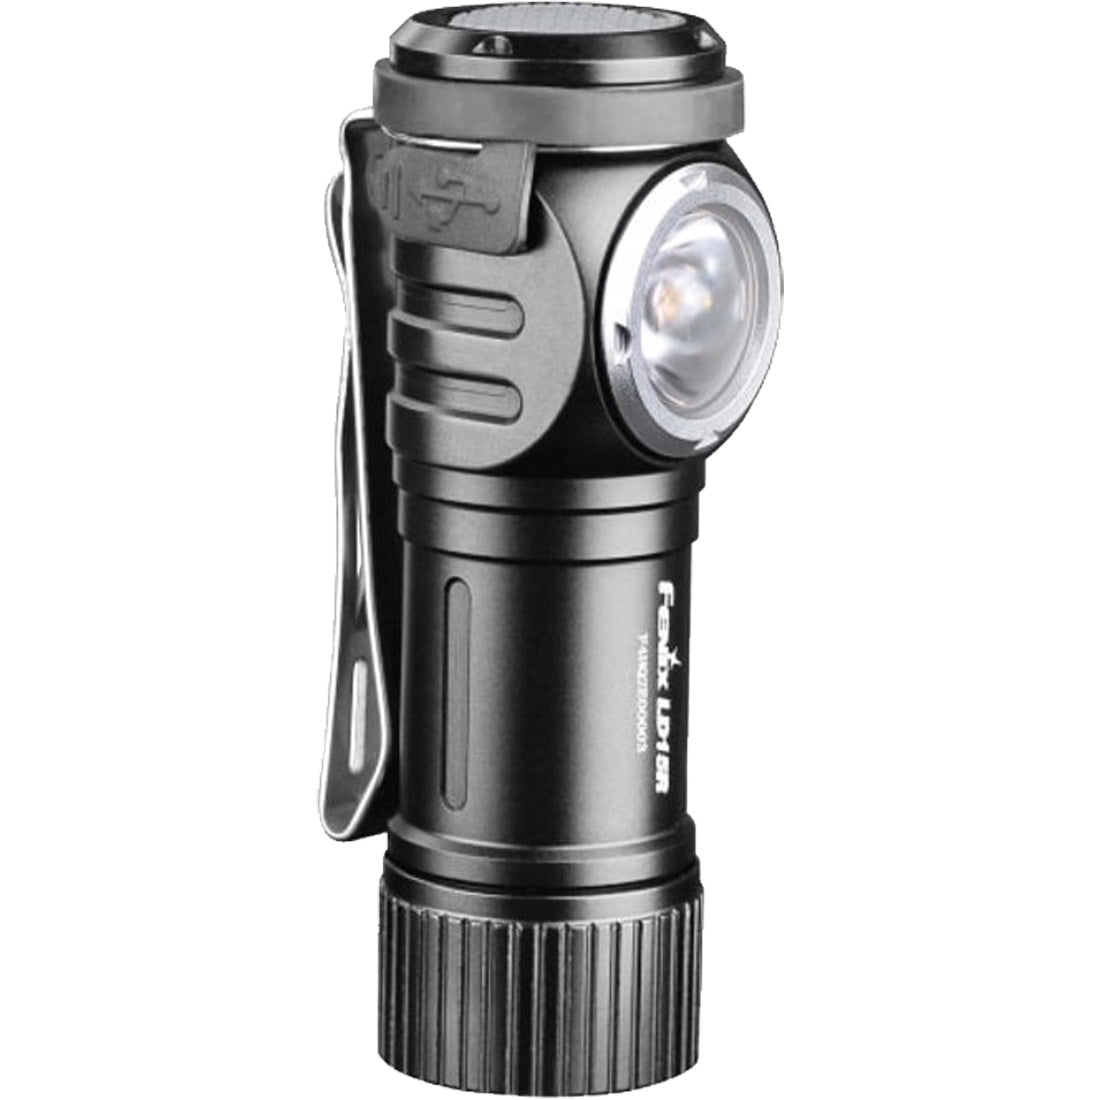 Fenix LD15R Right-Angled Rechargeable Flashlight